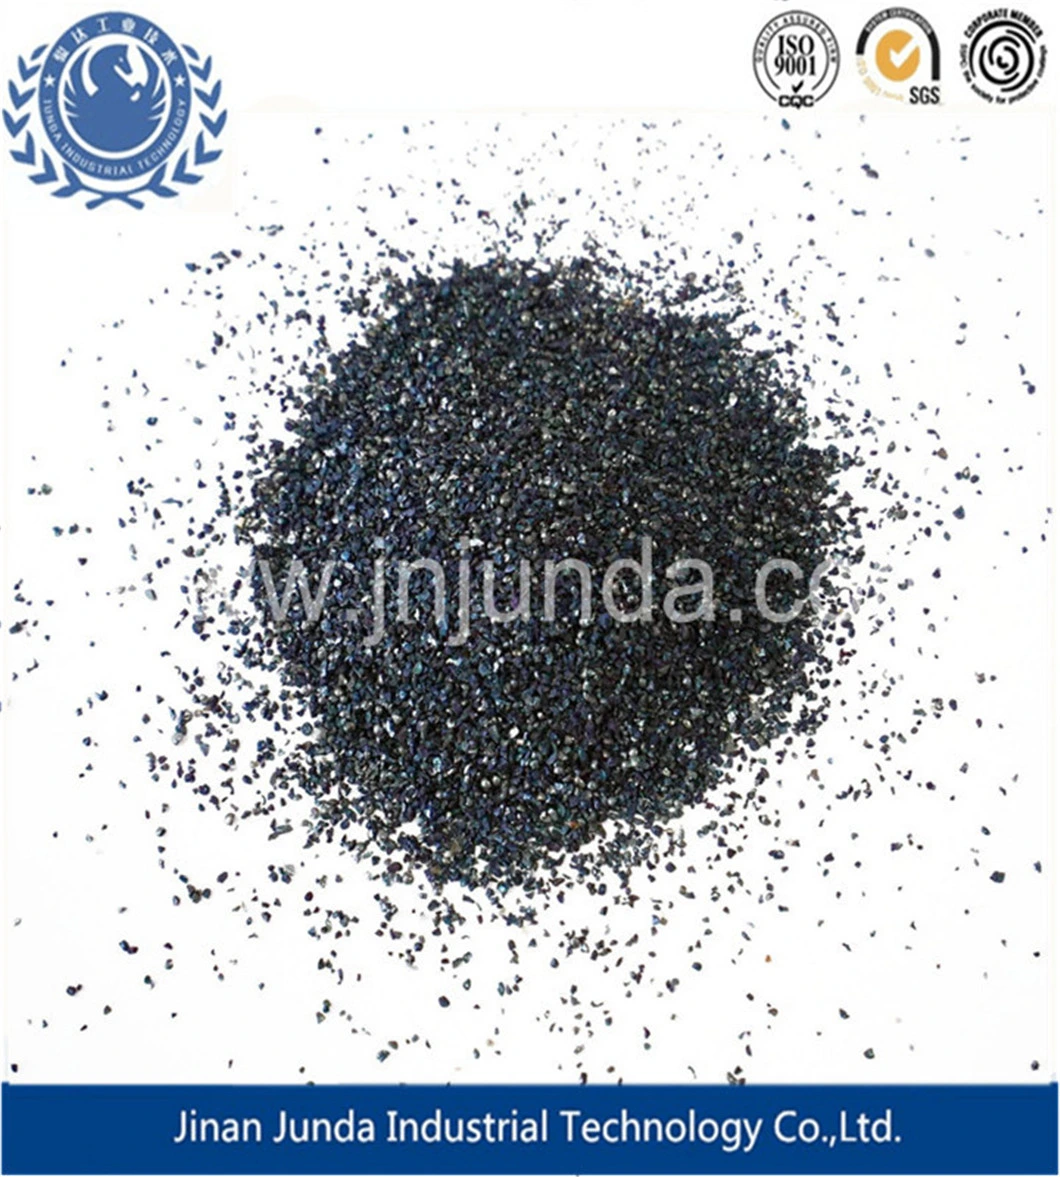 Factory Steel Grit Abrasive Materials for Polishing and Sandblasting